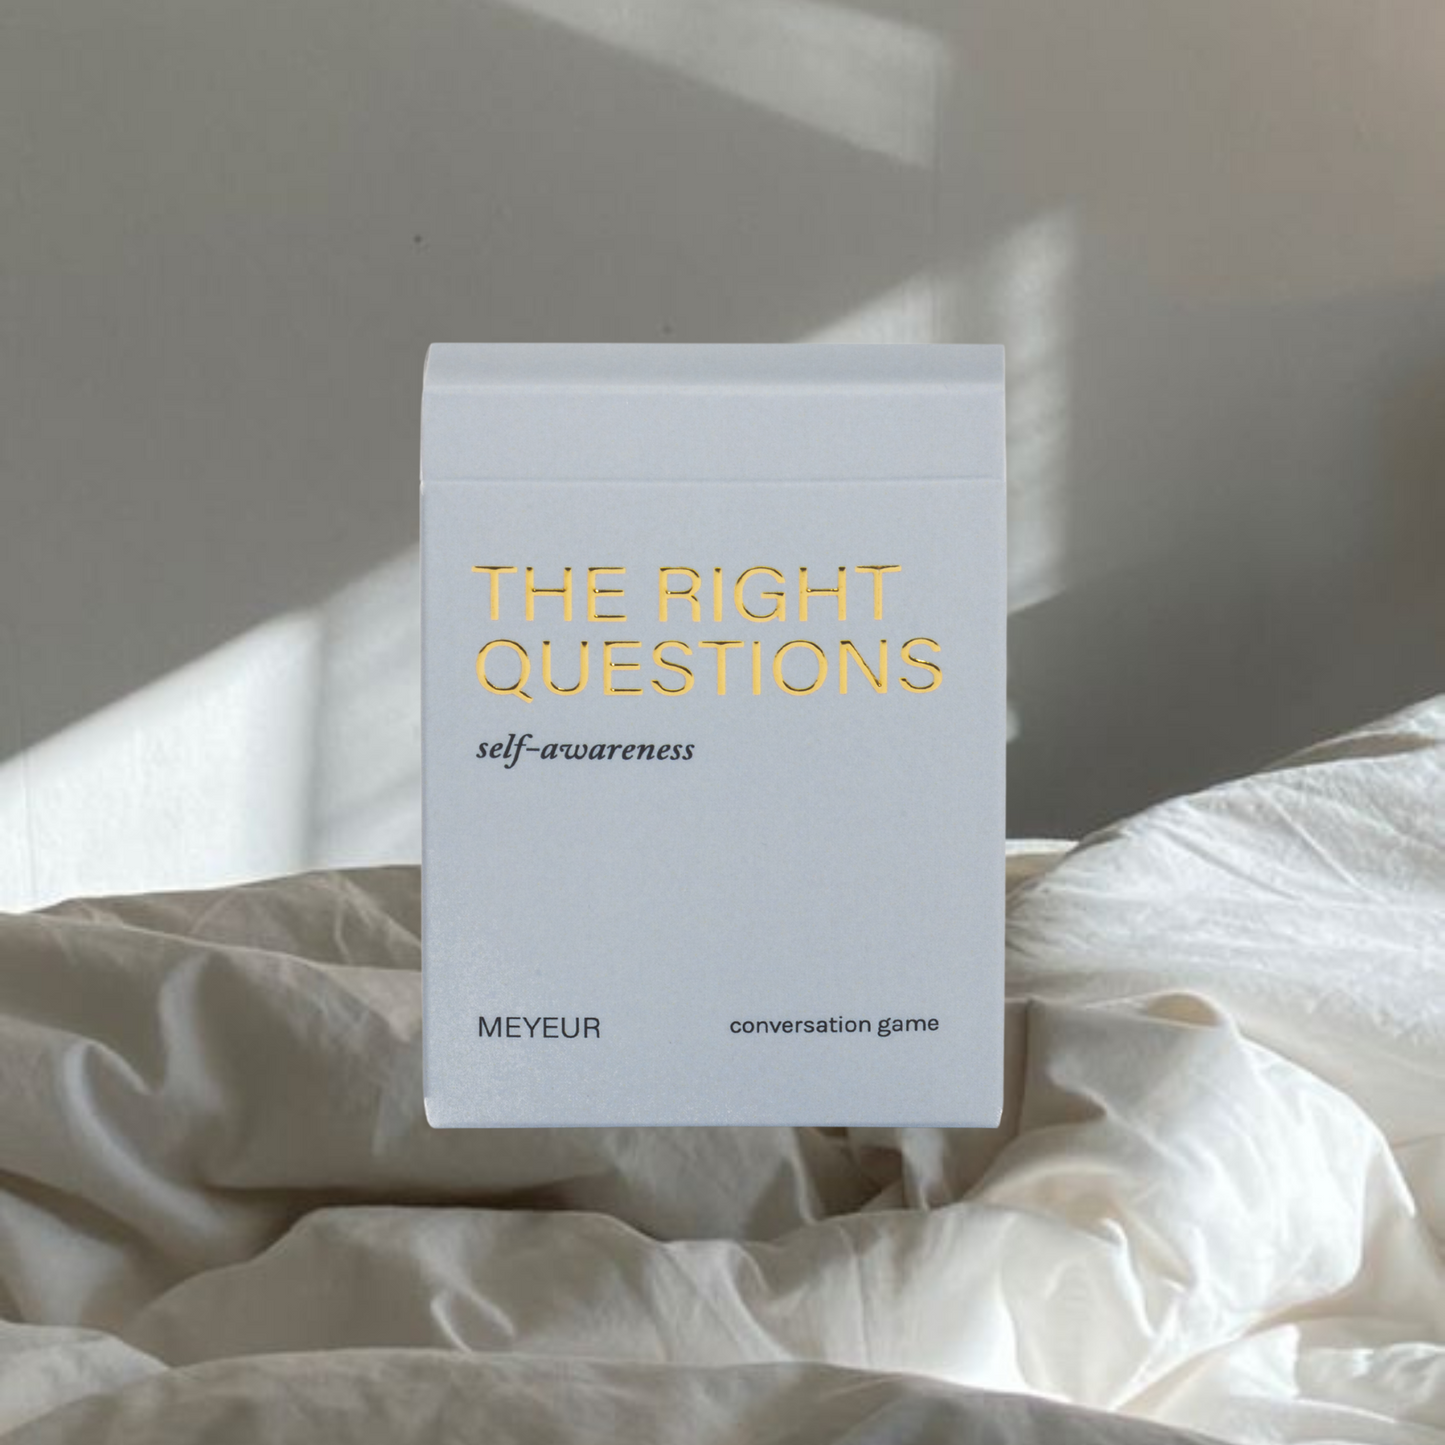 THE RIGHT QUESTIONS (self-awareness)